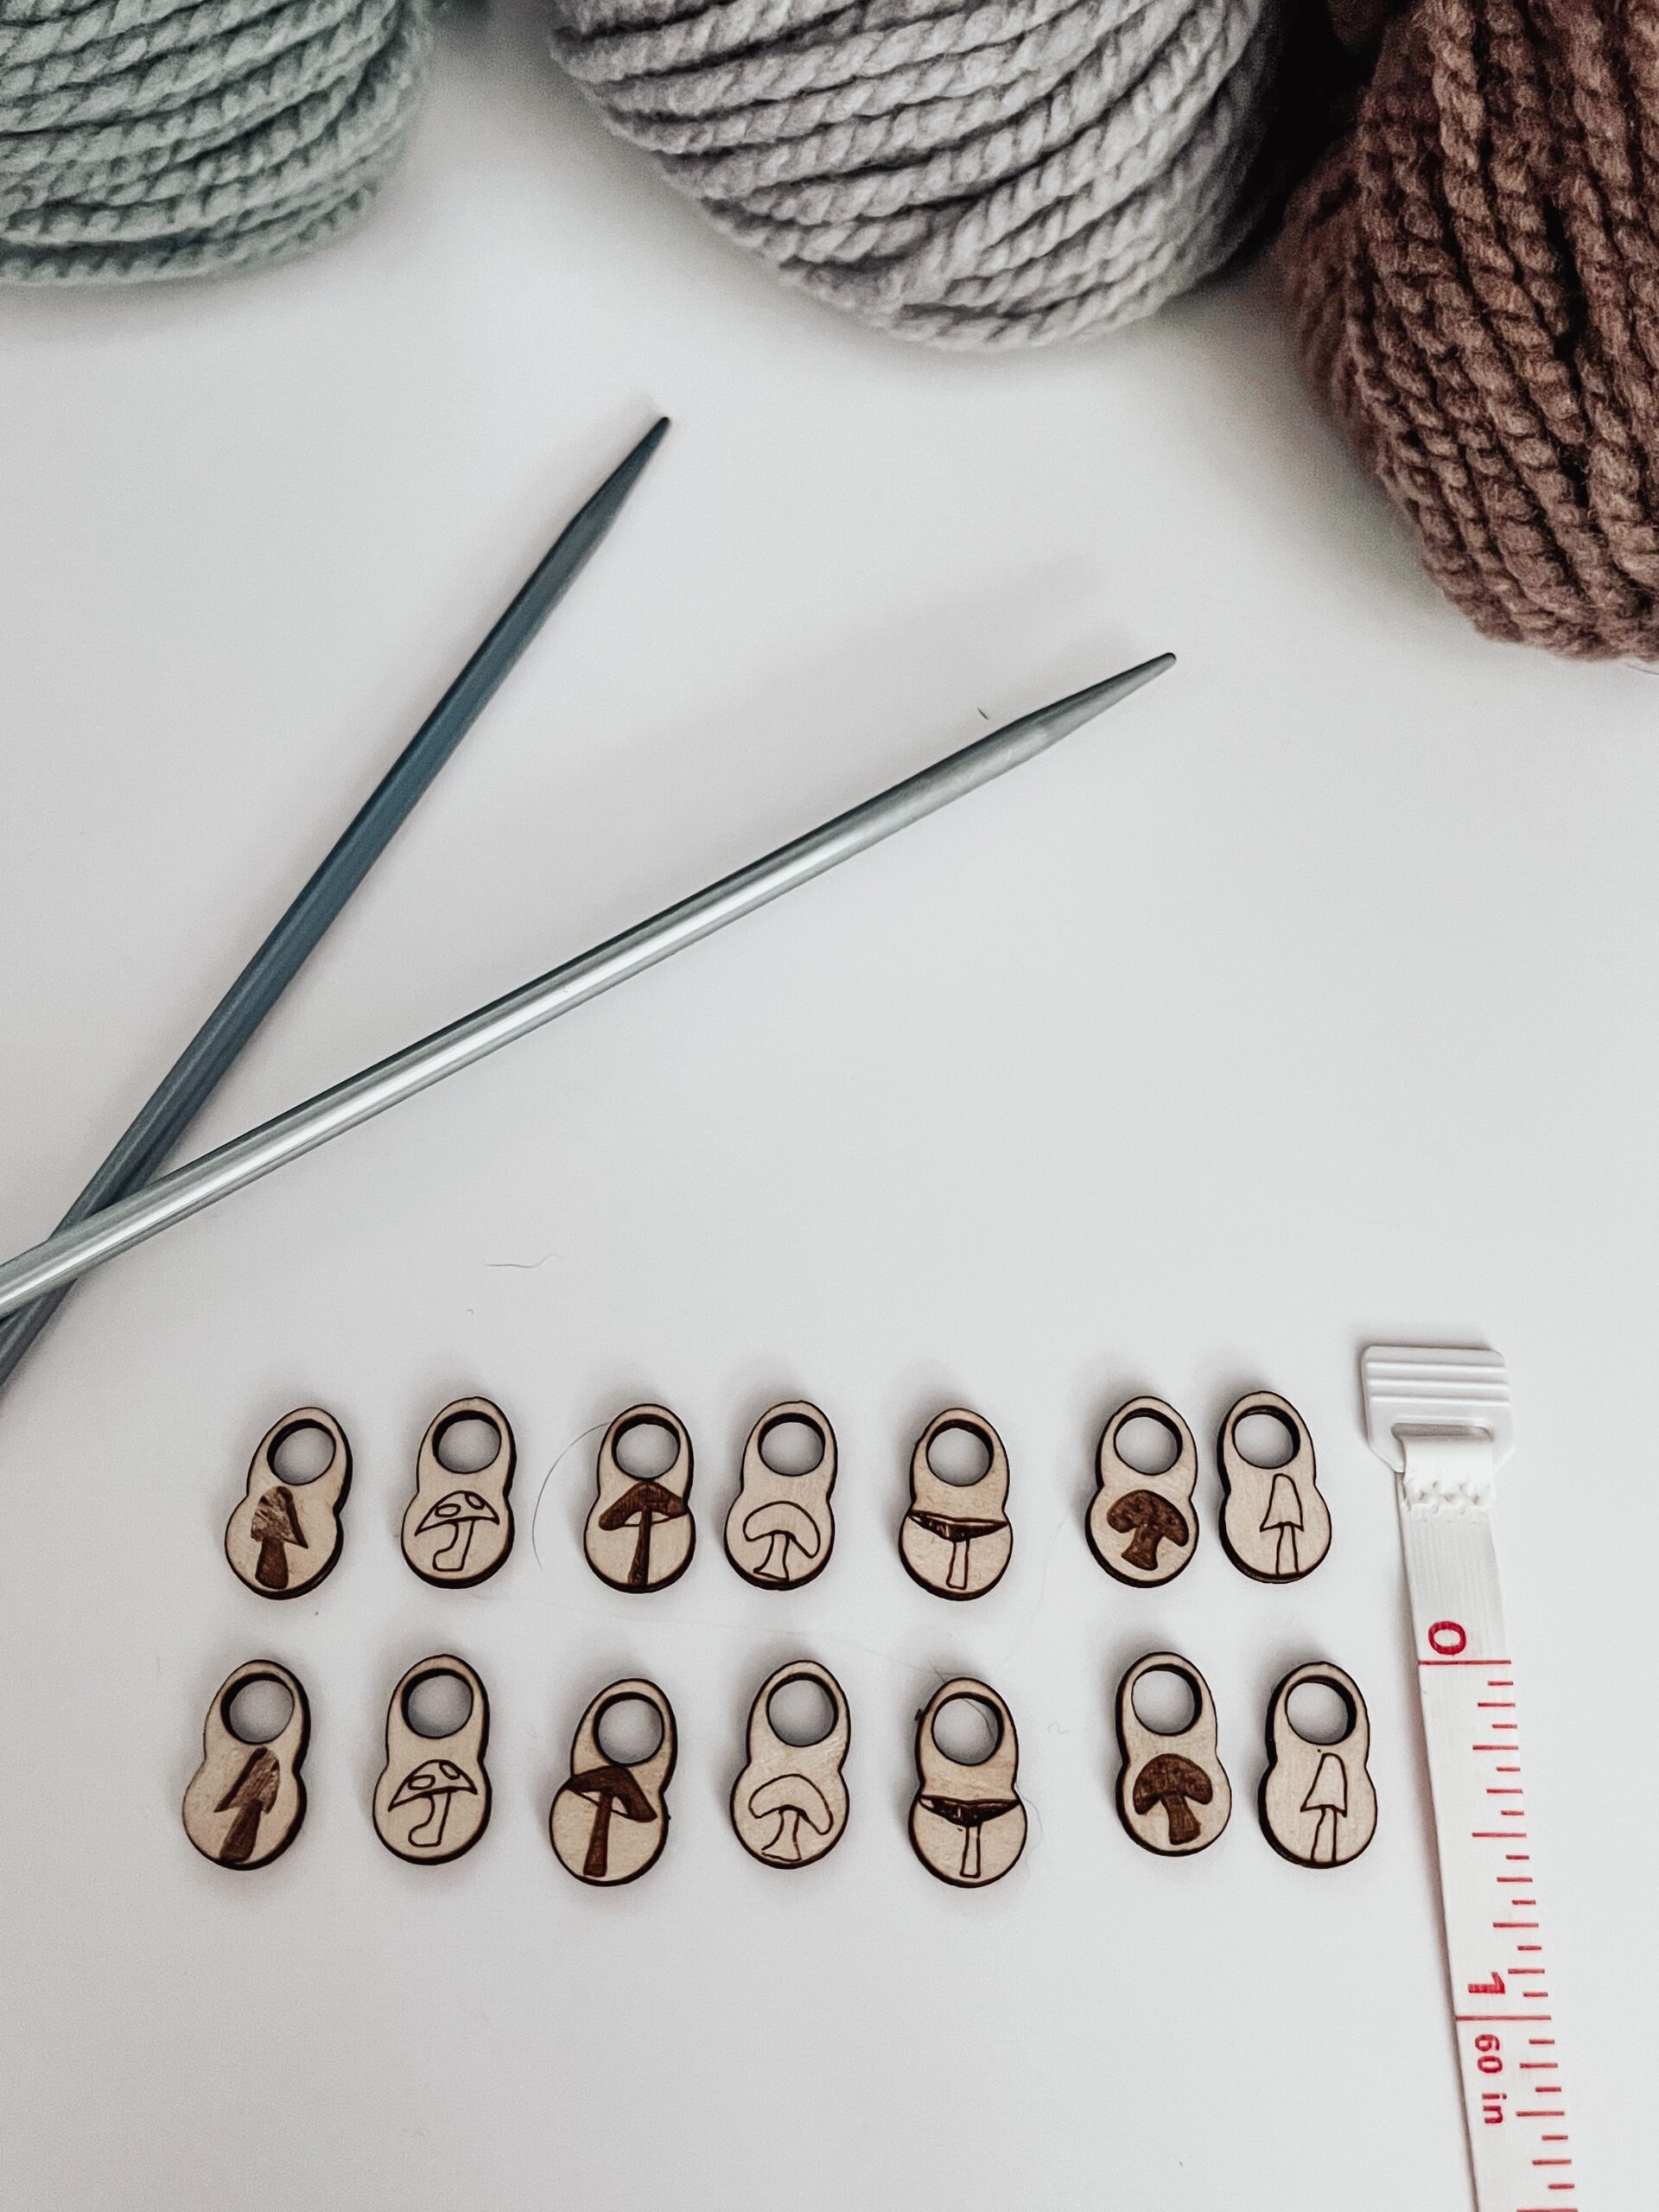 A total of 14 wood stitch markers with a variety of hand-drawn mushroom designs are displayed next to a measuring tape that shows they're approximately 1/2" tall. A pair of metal knitting needles and three skeins of merino yarn are in the background.